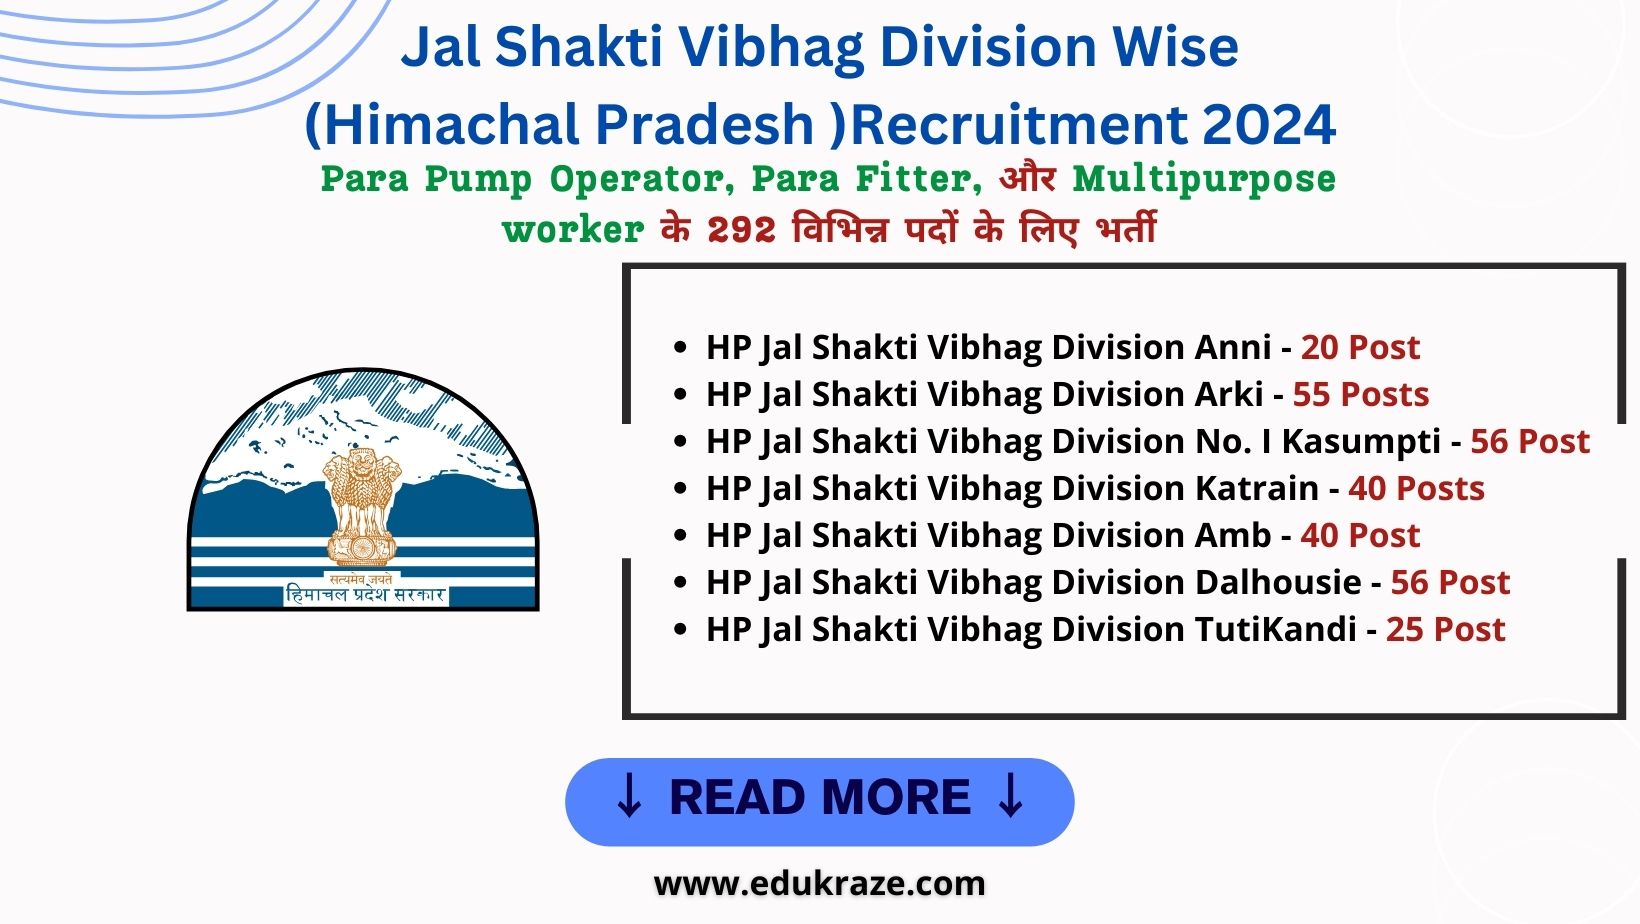 HP Jal Shakti Vibhag Division Wise Recruitment 2024 | 292 Vacancies Out for Para Pump Operator, Para Fitter & Multipurpose Worker